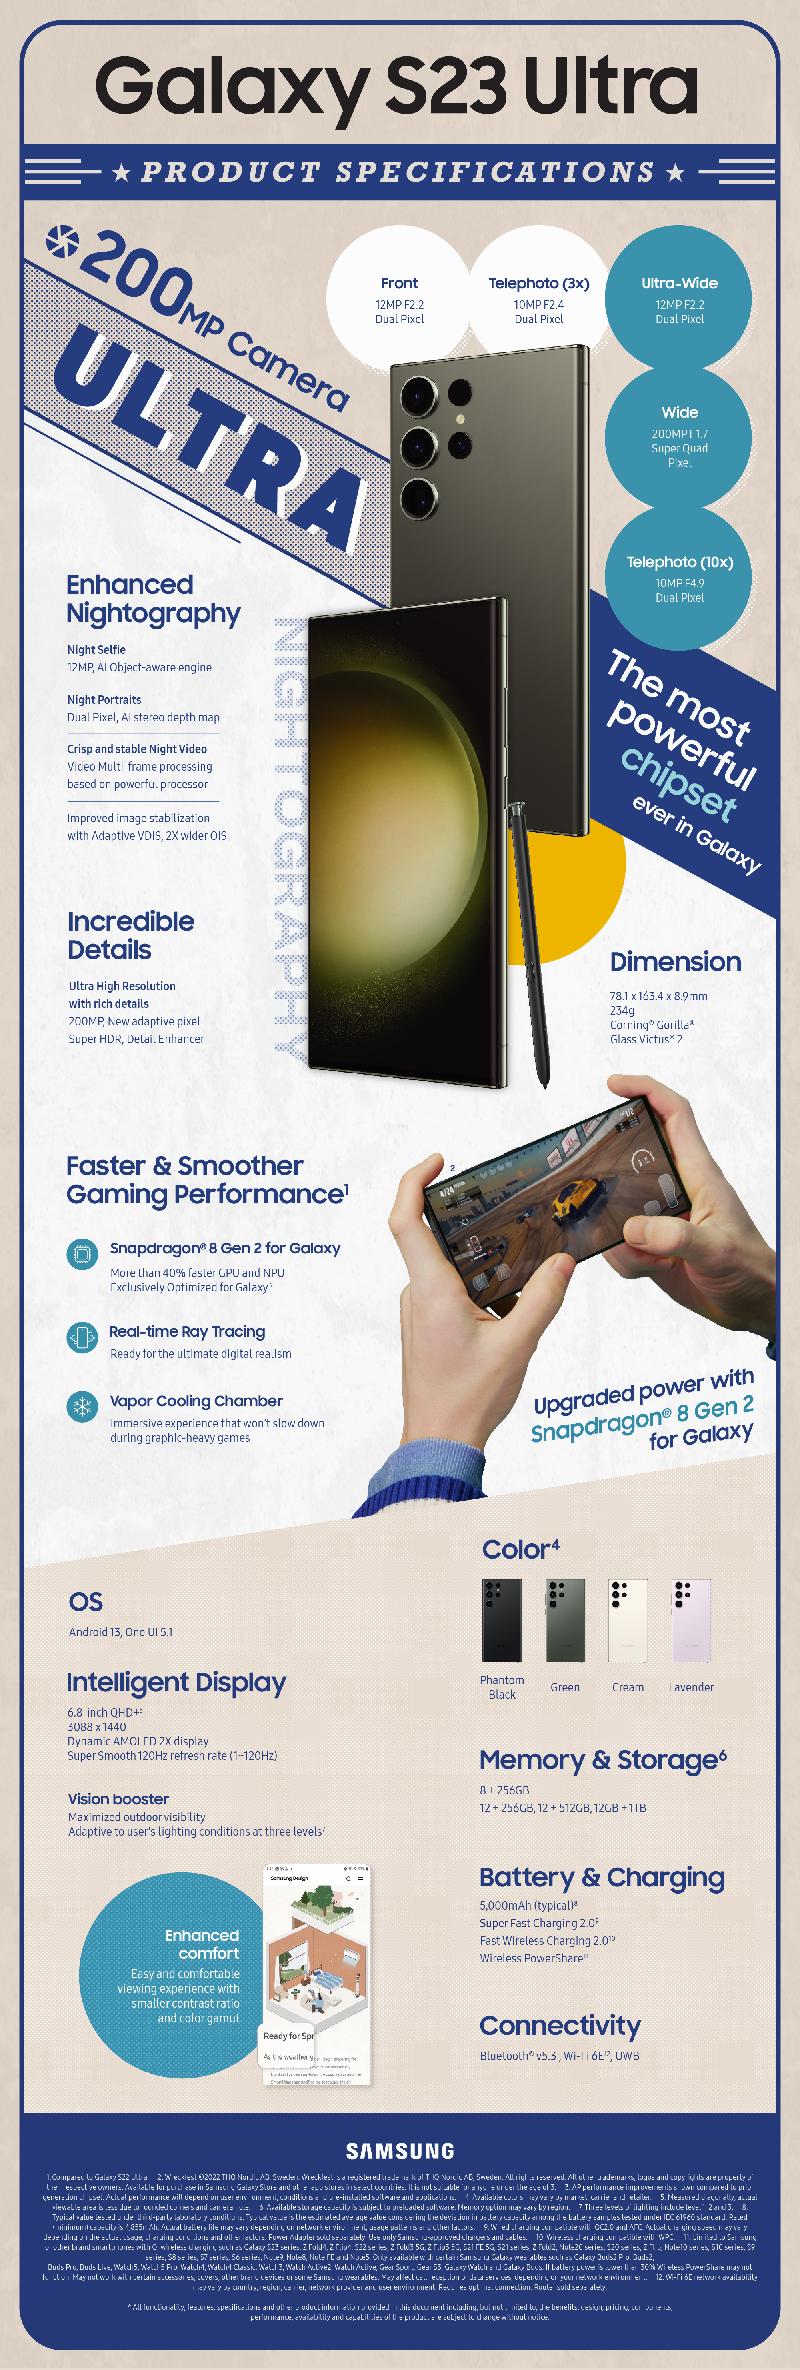 Galaxy_S23ultra_Infographic_Product_Specifications.jpg